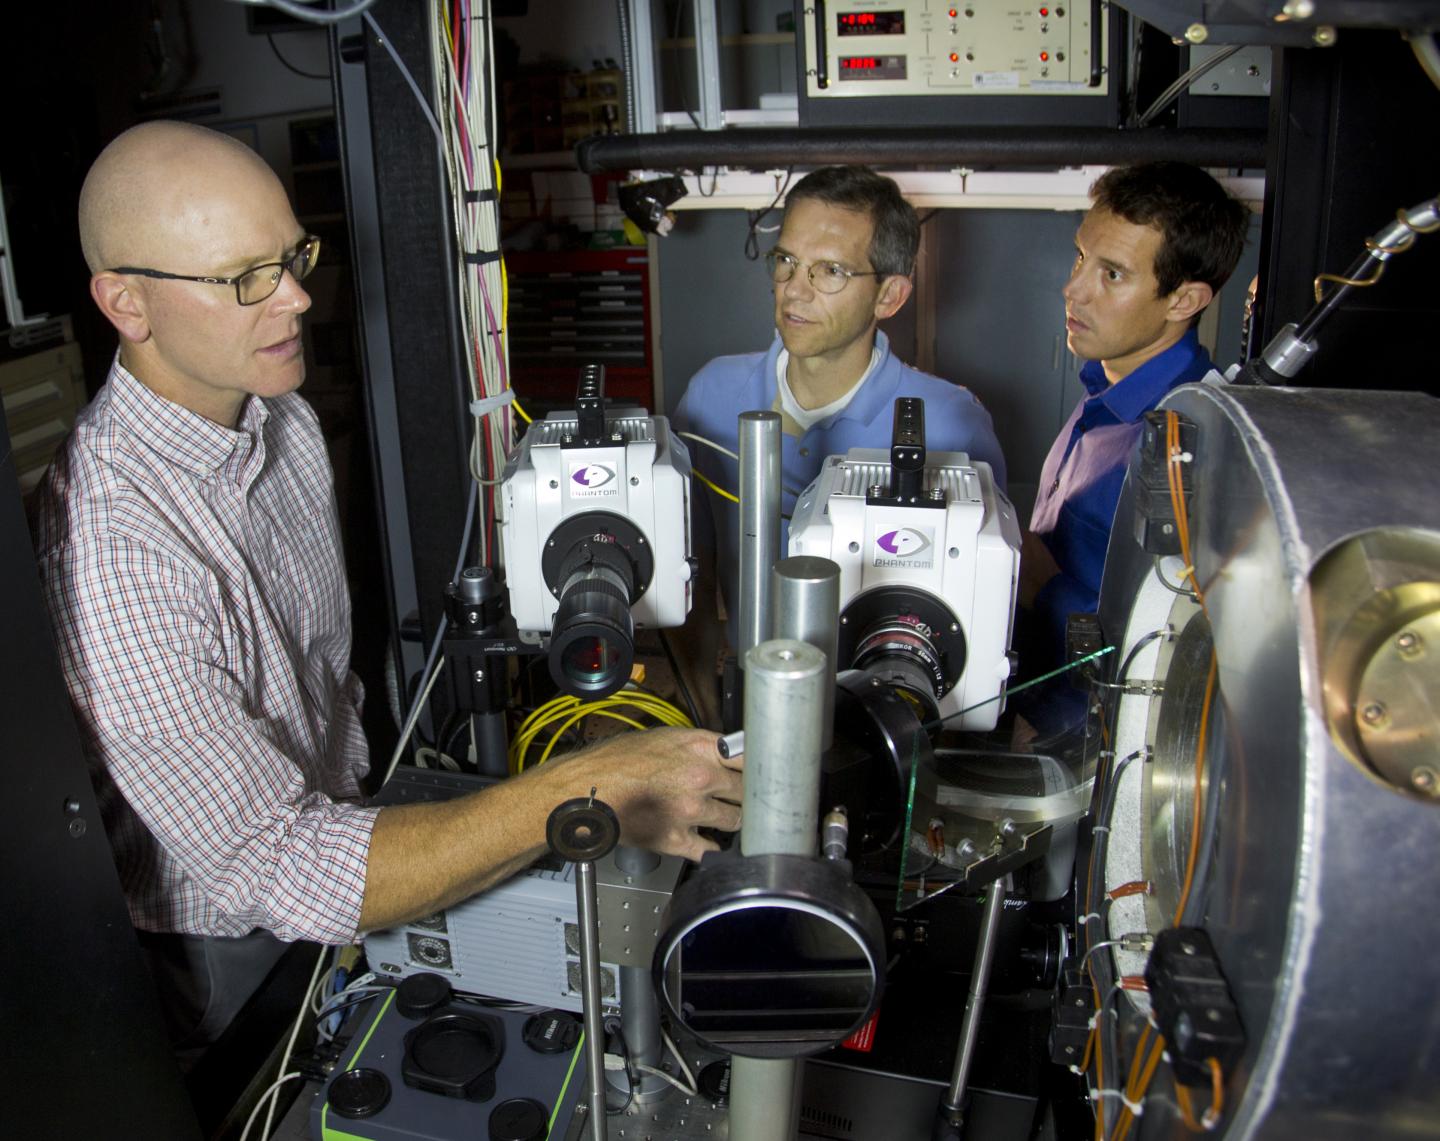 Sandia National Laboratories researchers Scott Skeen, left, and Lyle Pickett, center, and former Sandia researcher Julien Manin discuss a new optical device developed at Sandia that can quantify the formation of soot. (Dino Vournas)